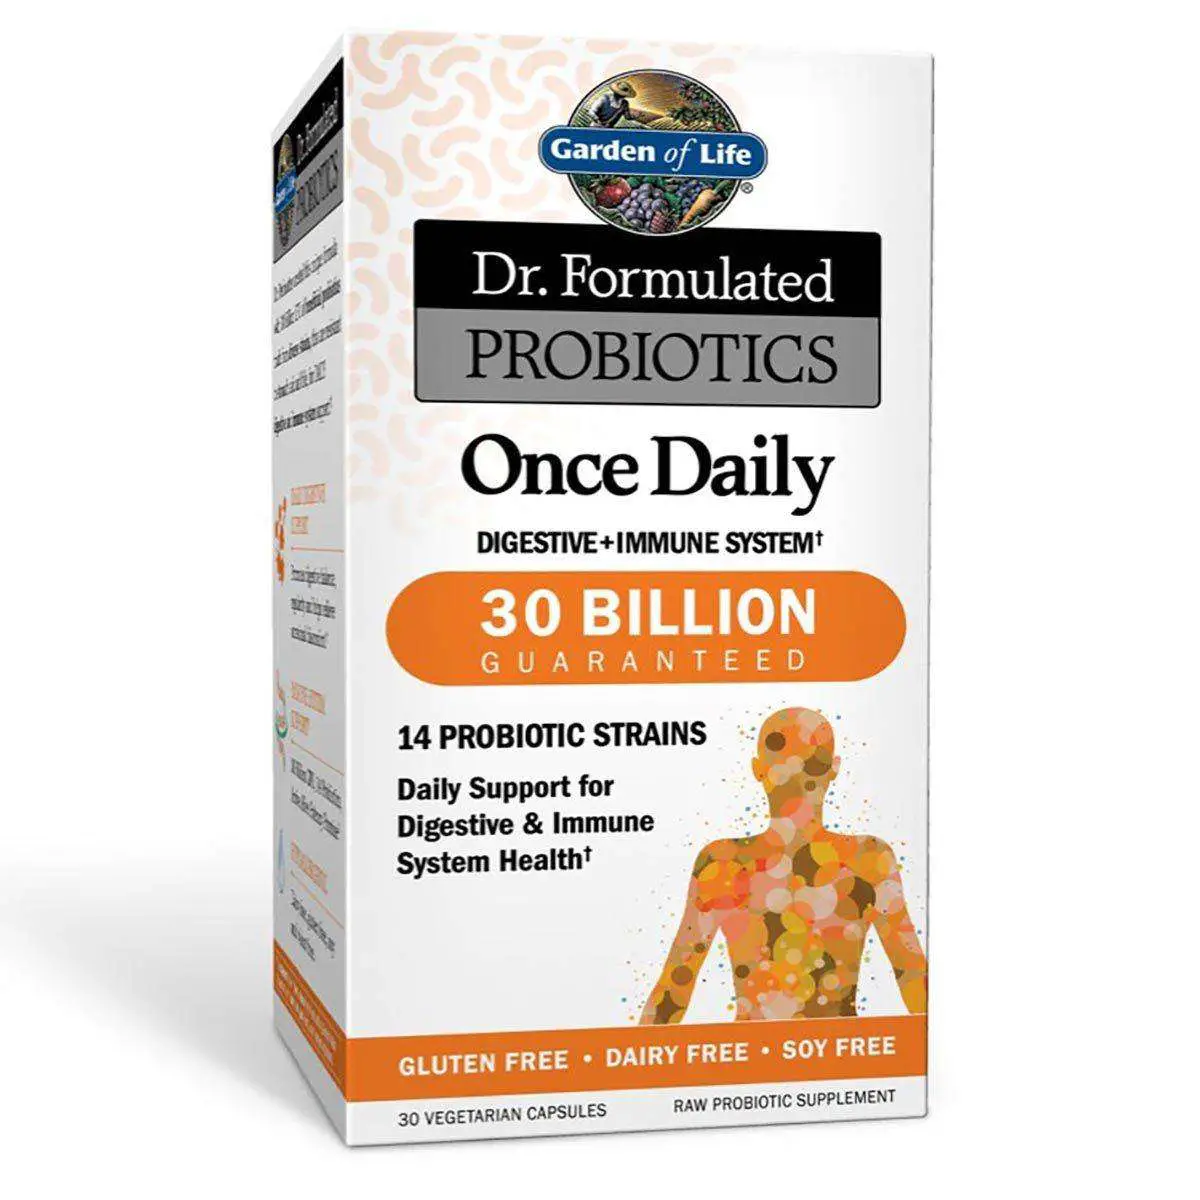 Garden of Life Dr. Formulated Probiotics 1x Daily